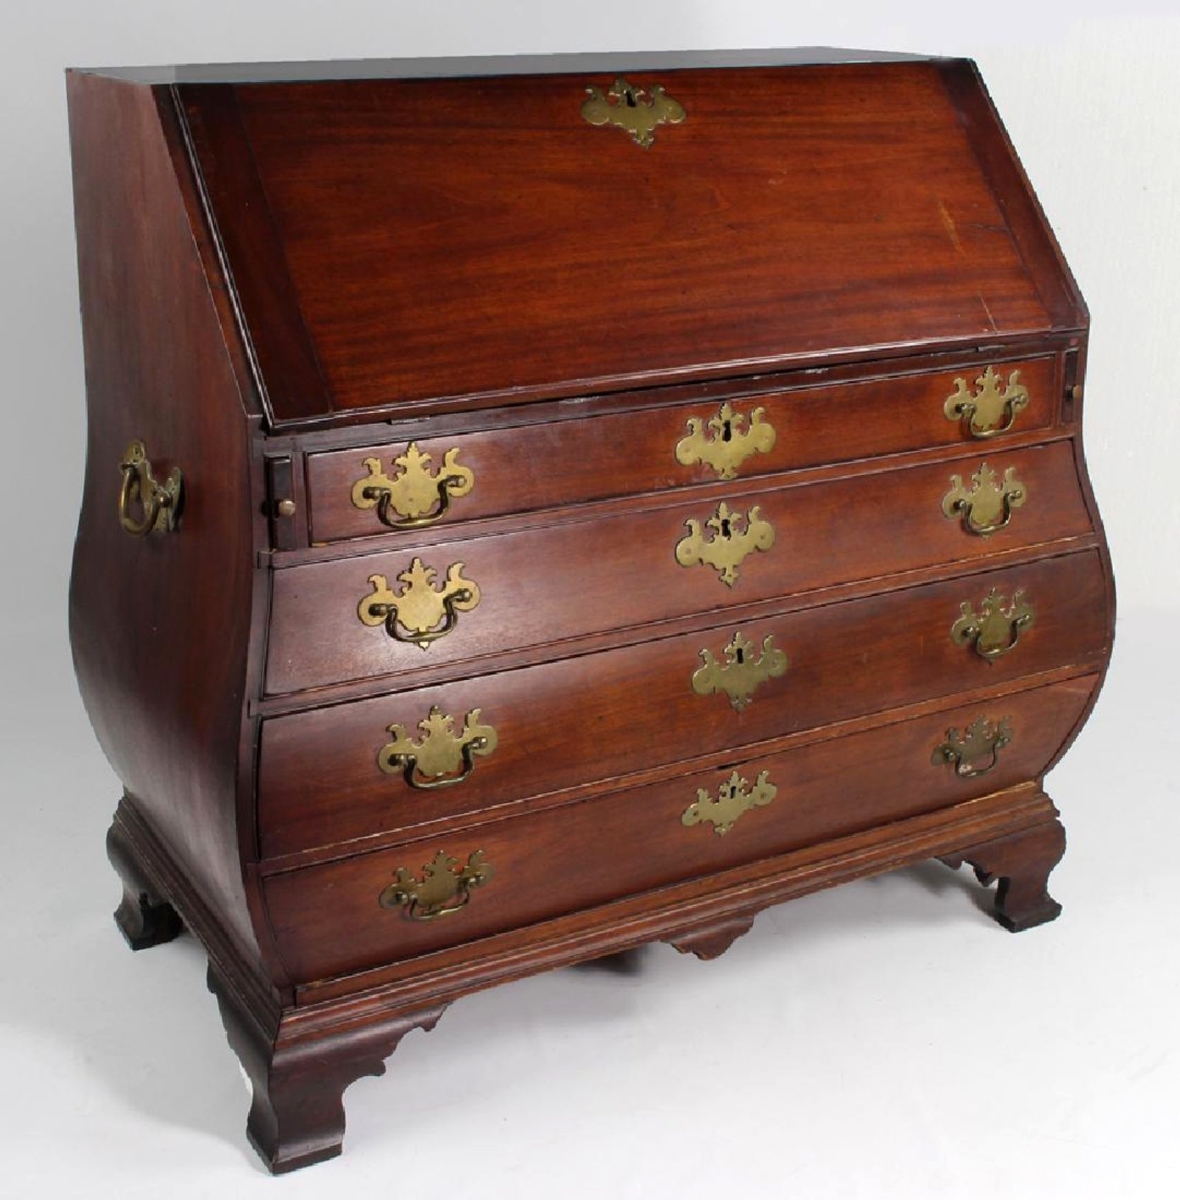 The highlight of the sale, a bombe slant-front desk brought $240,000. It was new to the market, never having been out of its home. Prior to this one, only about 14 examples were known.